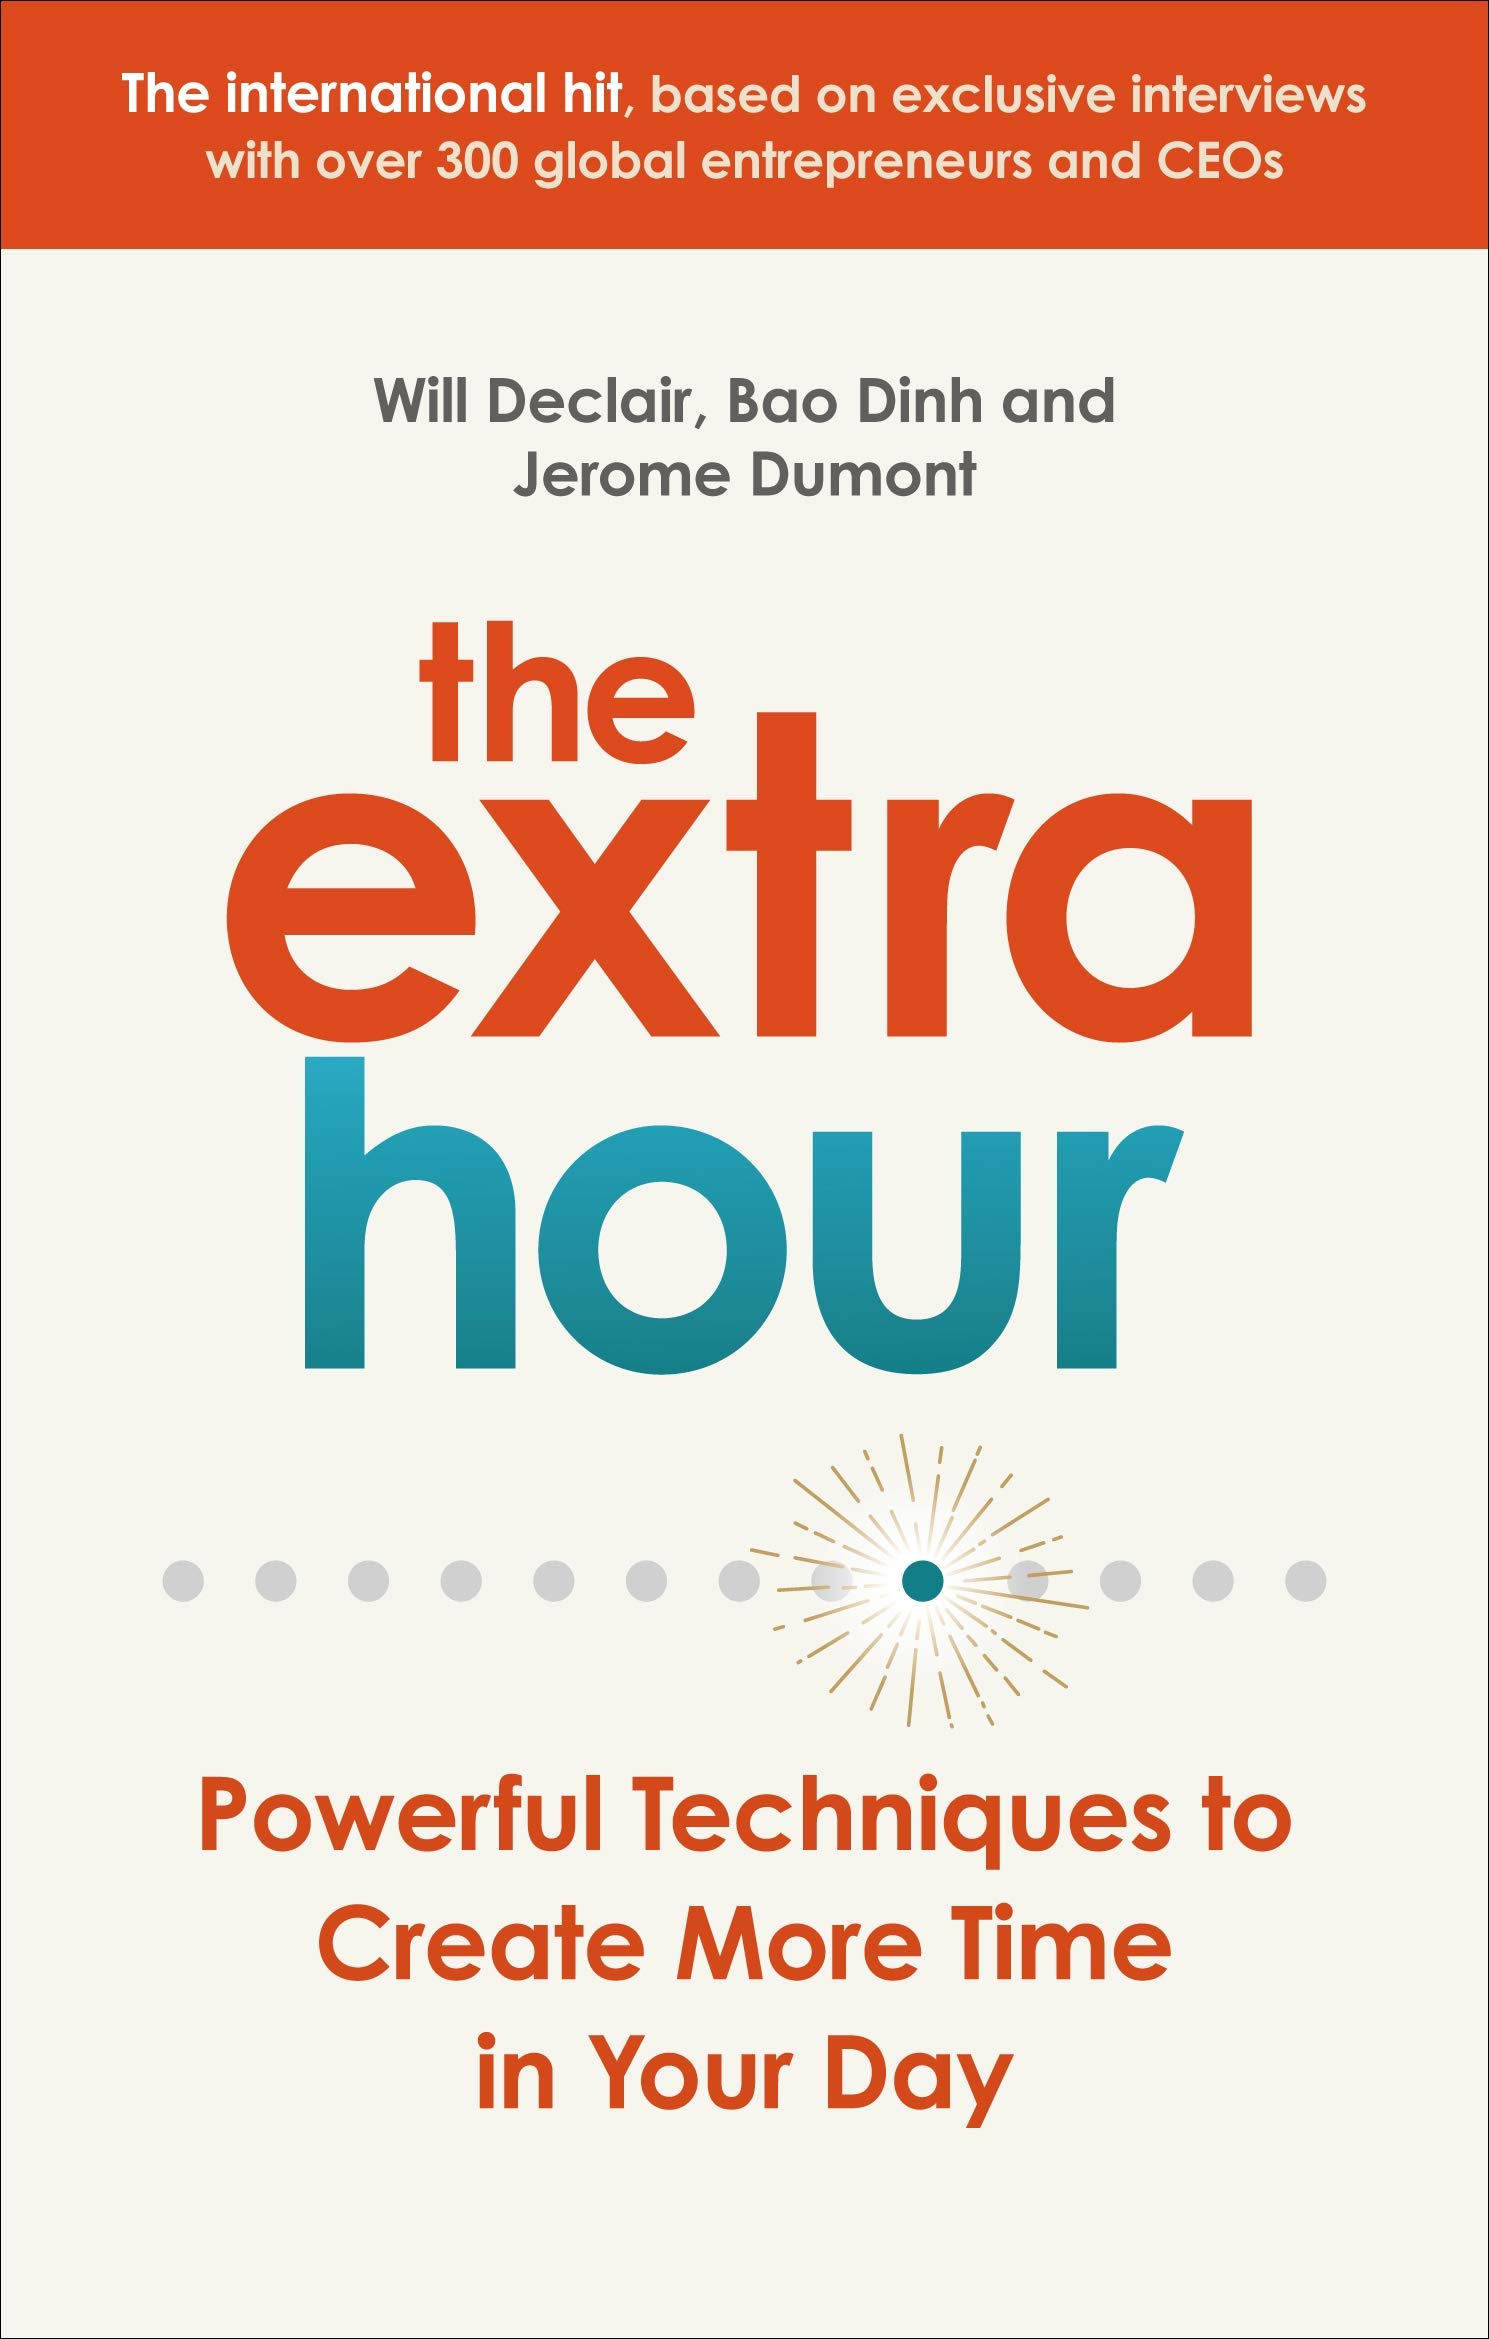 The Extra Hour | Will Declair, Jerome Dumont, Bao Dinh image7